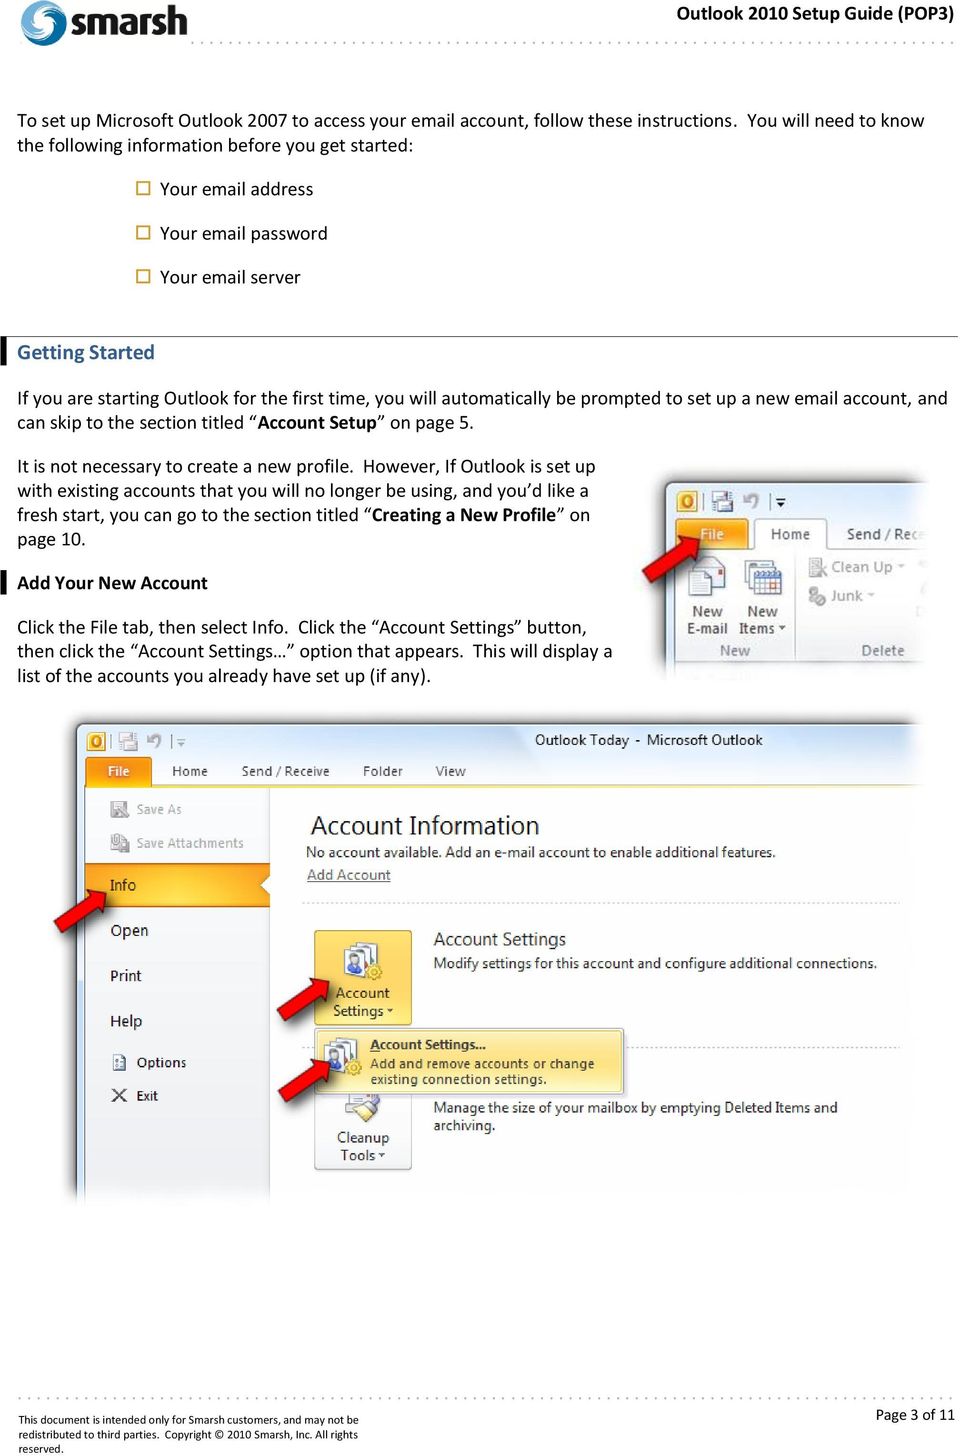 will automatically be prompted to set up a new email account, and can skip to the section titled Account Setup on page 5. It is not necessary to create a new profile.